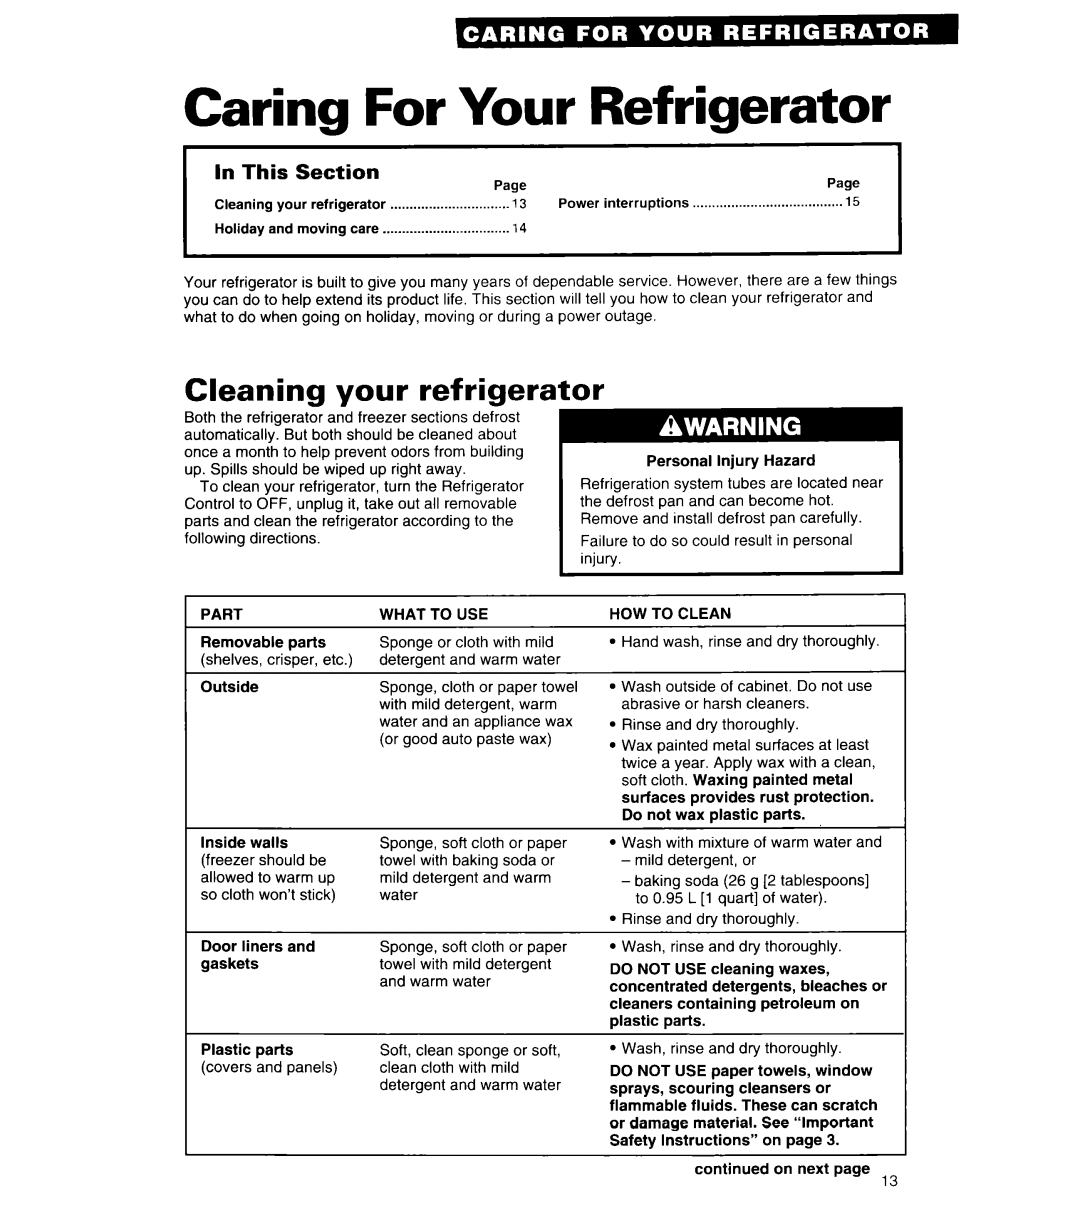 Whirlpool 6ET18ZK important safety instructions Caring For Your Refrigerator, Cleaning your refrigerator, In This, Section 